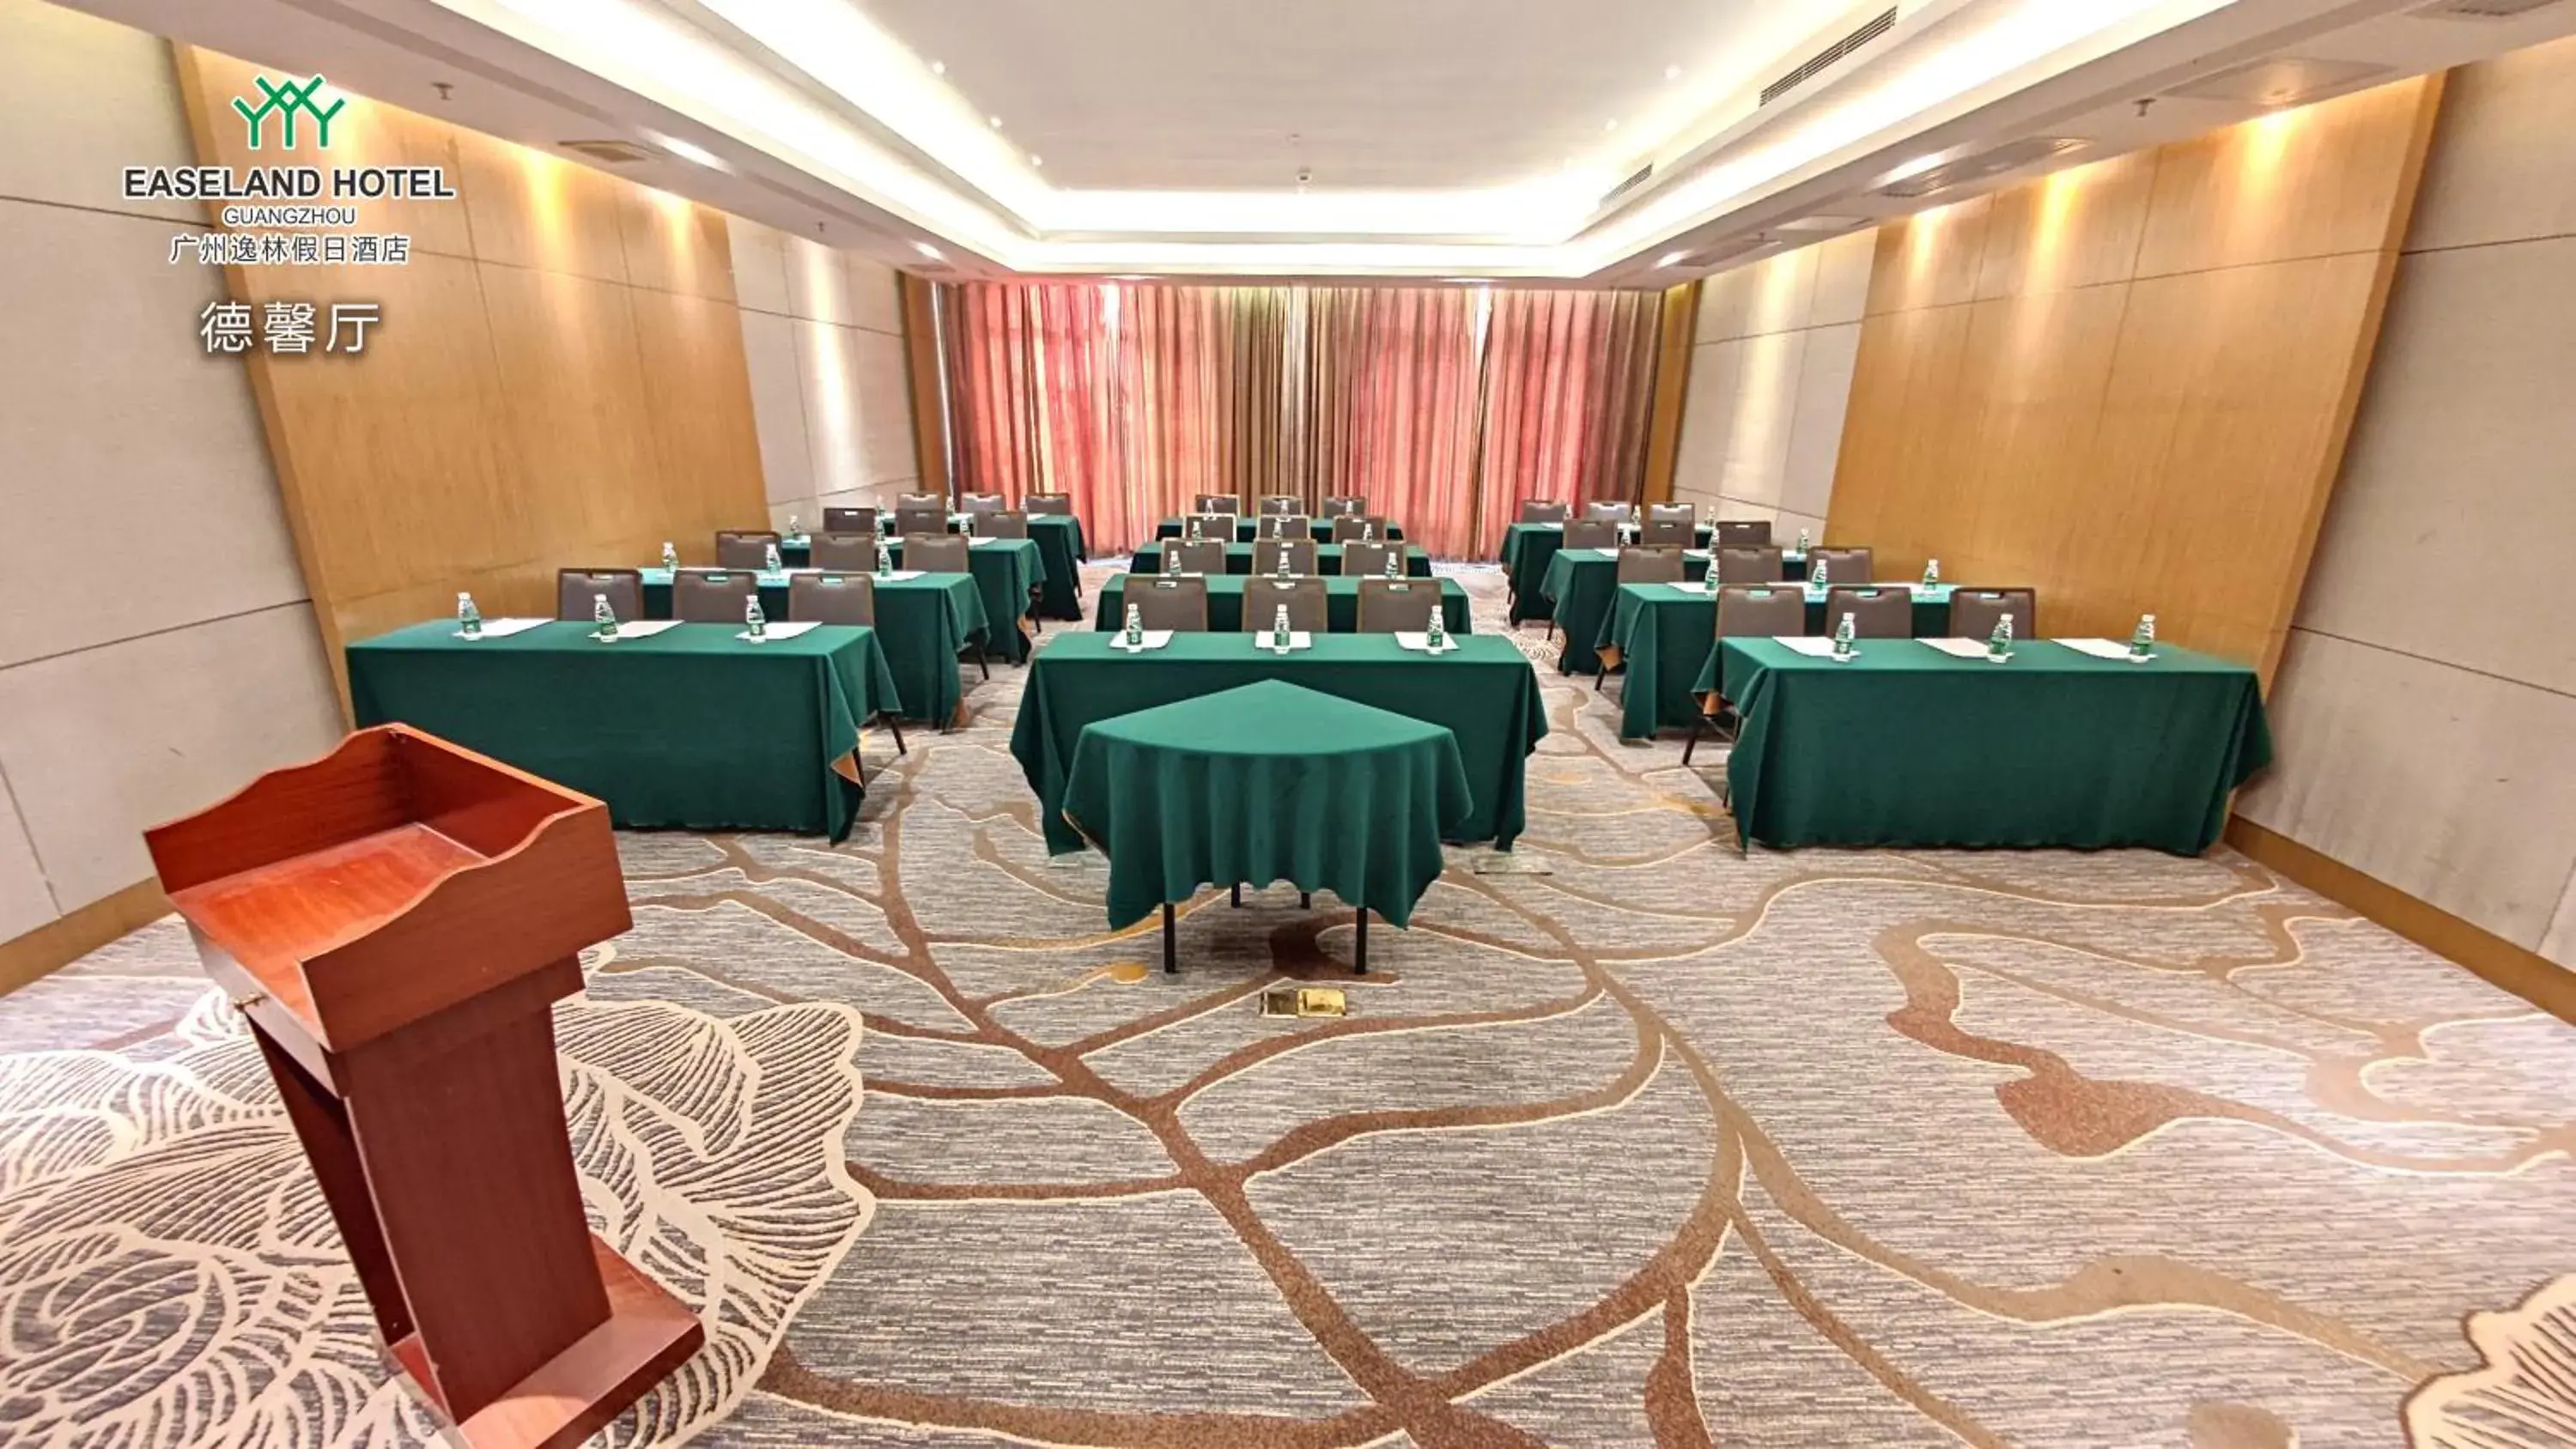 Business facilities in Easeland Hotel